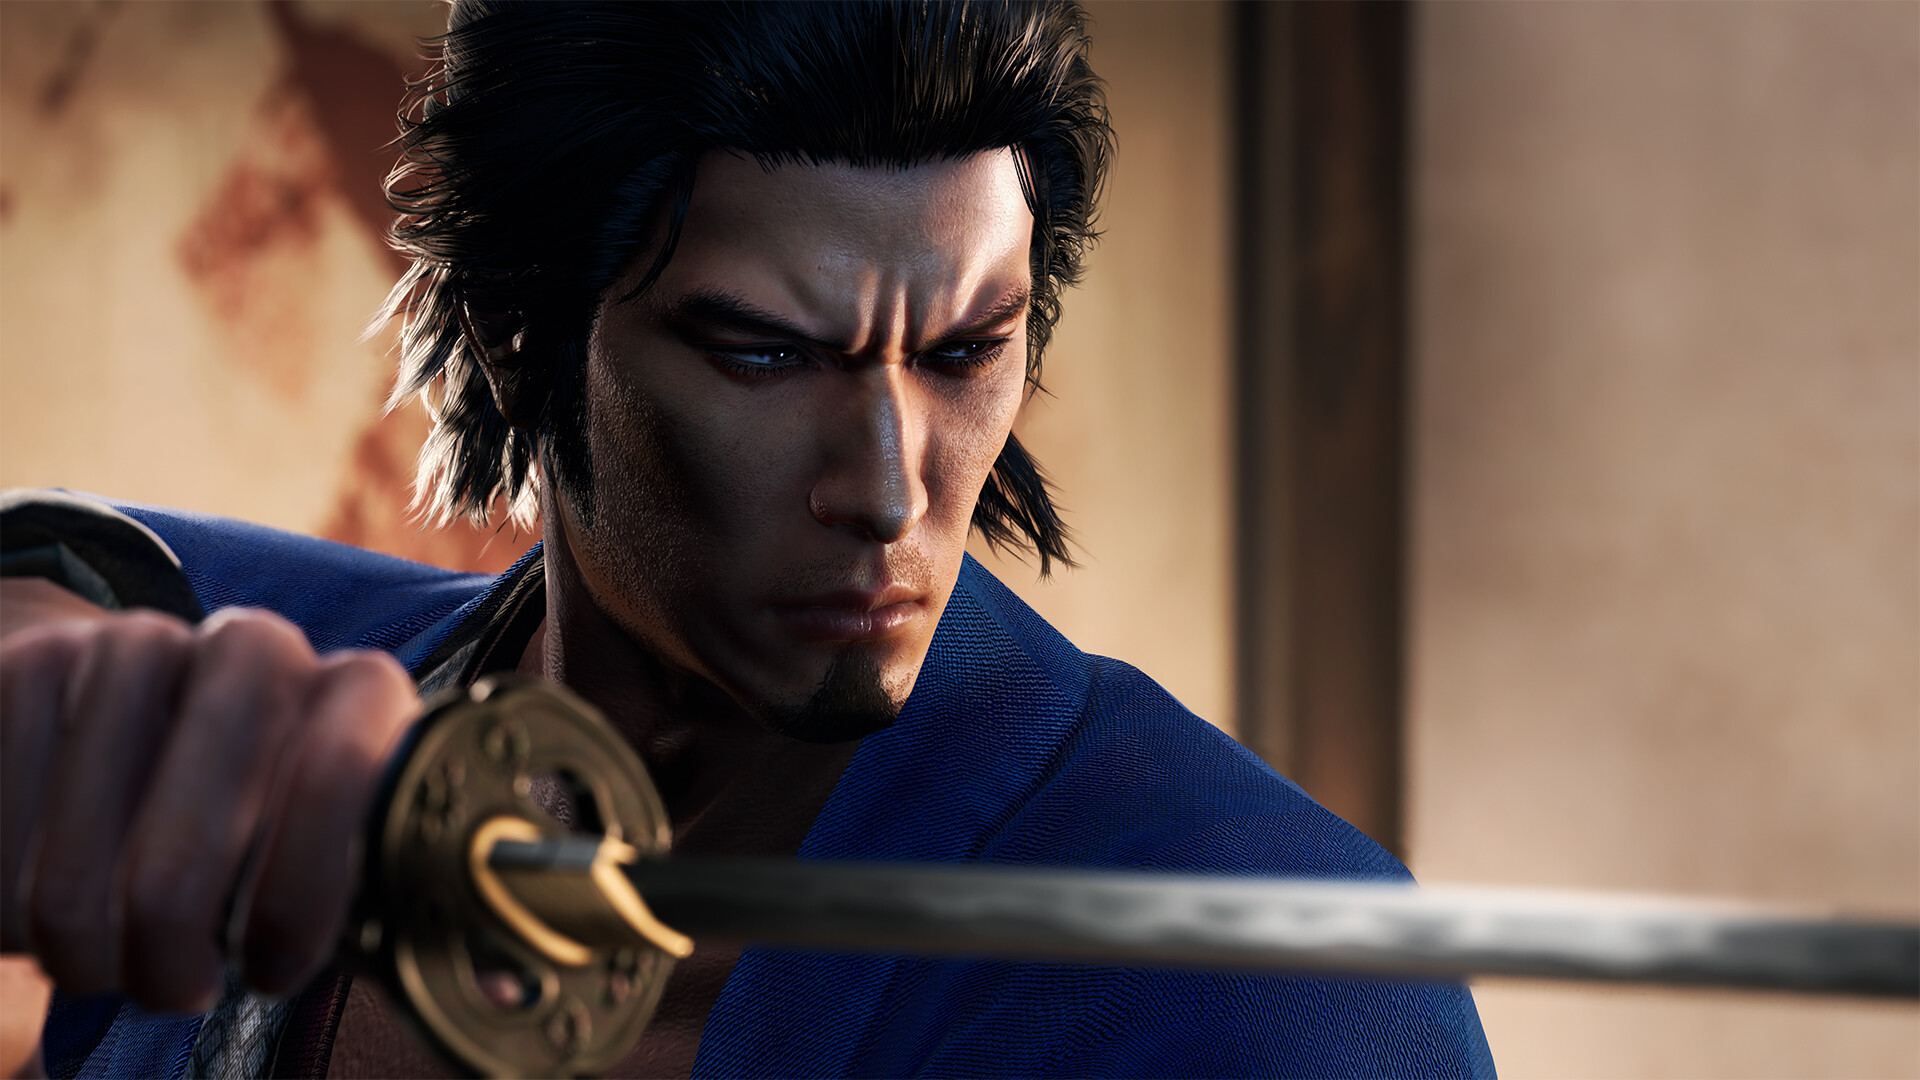 Cities: Skylines 2 and Like a Dragon: Ishin! lead the charge in another strong month for PC Game Pass